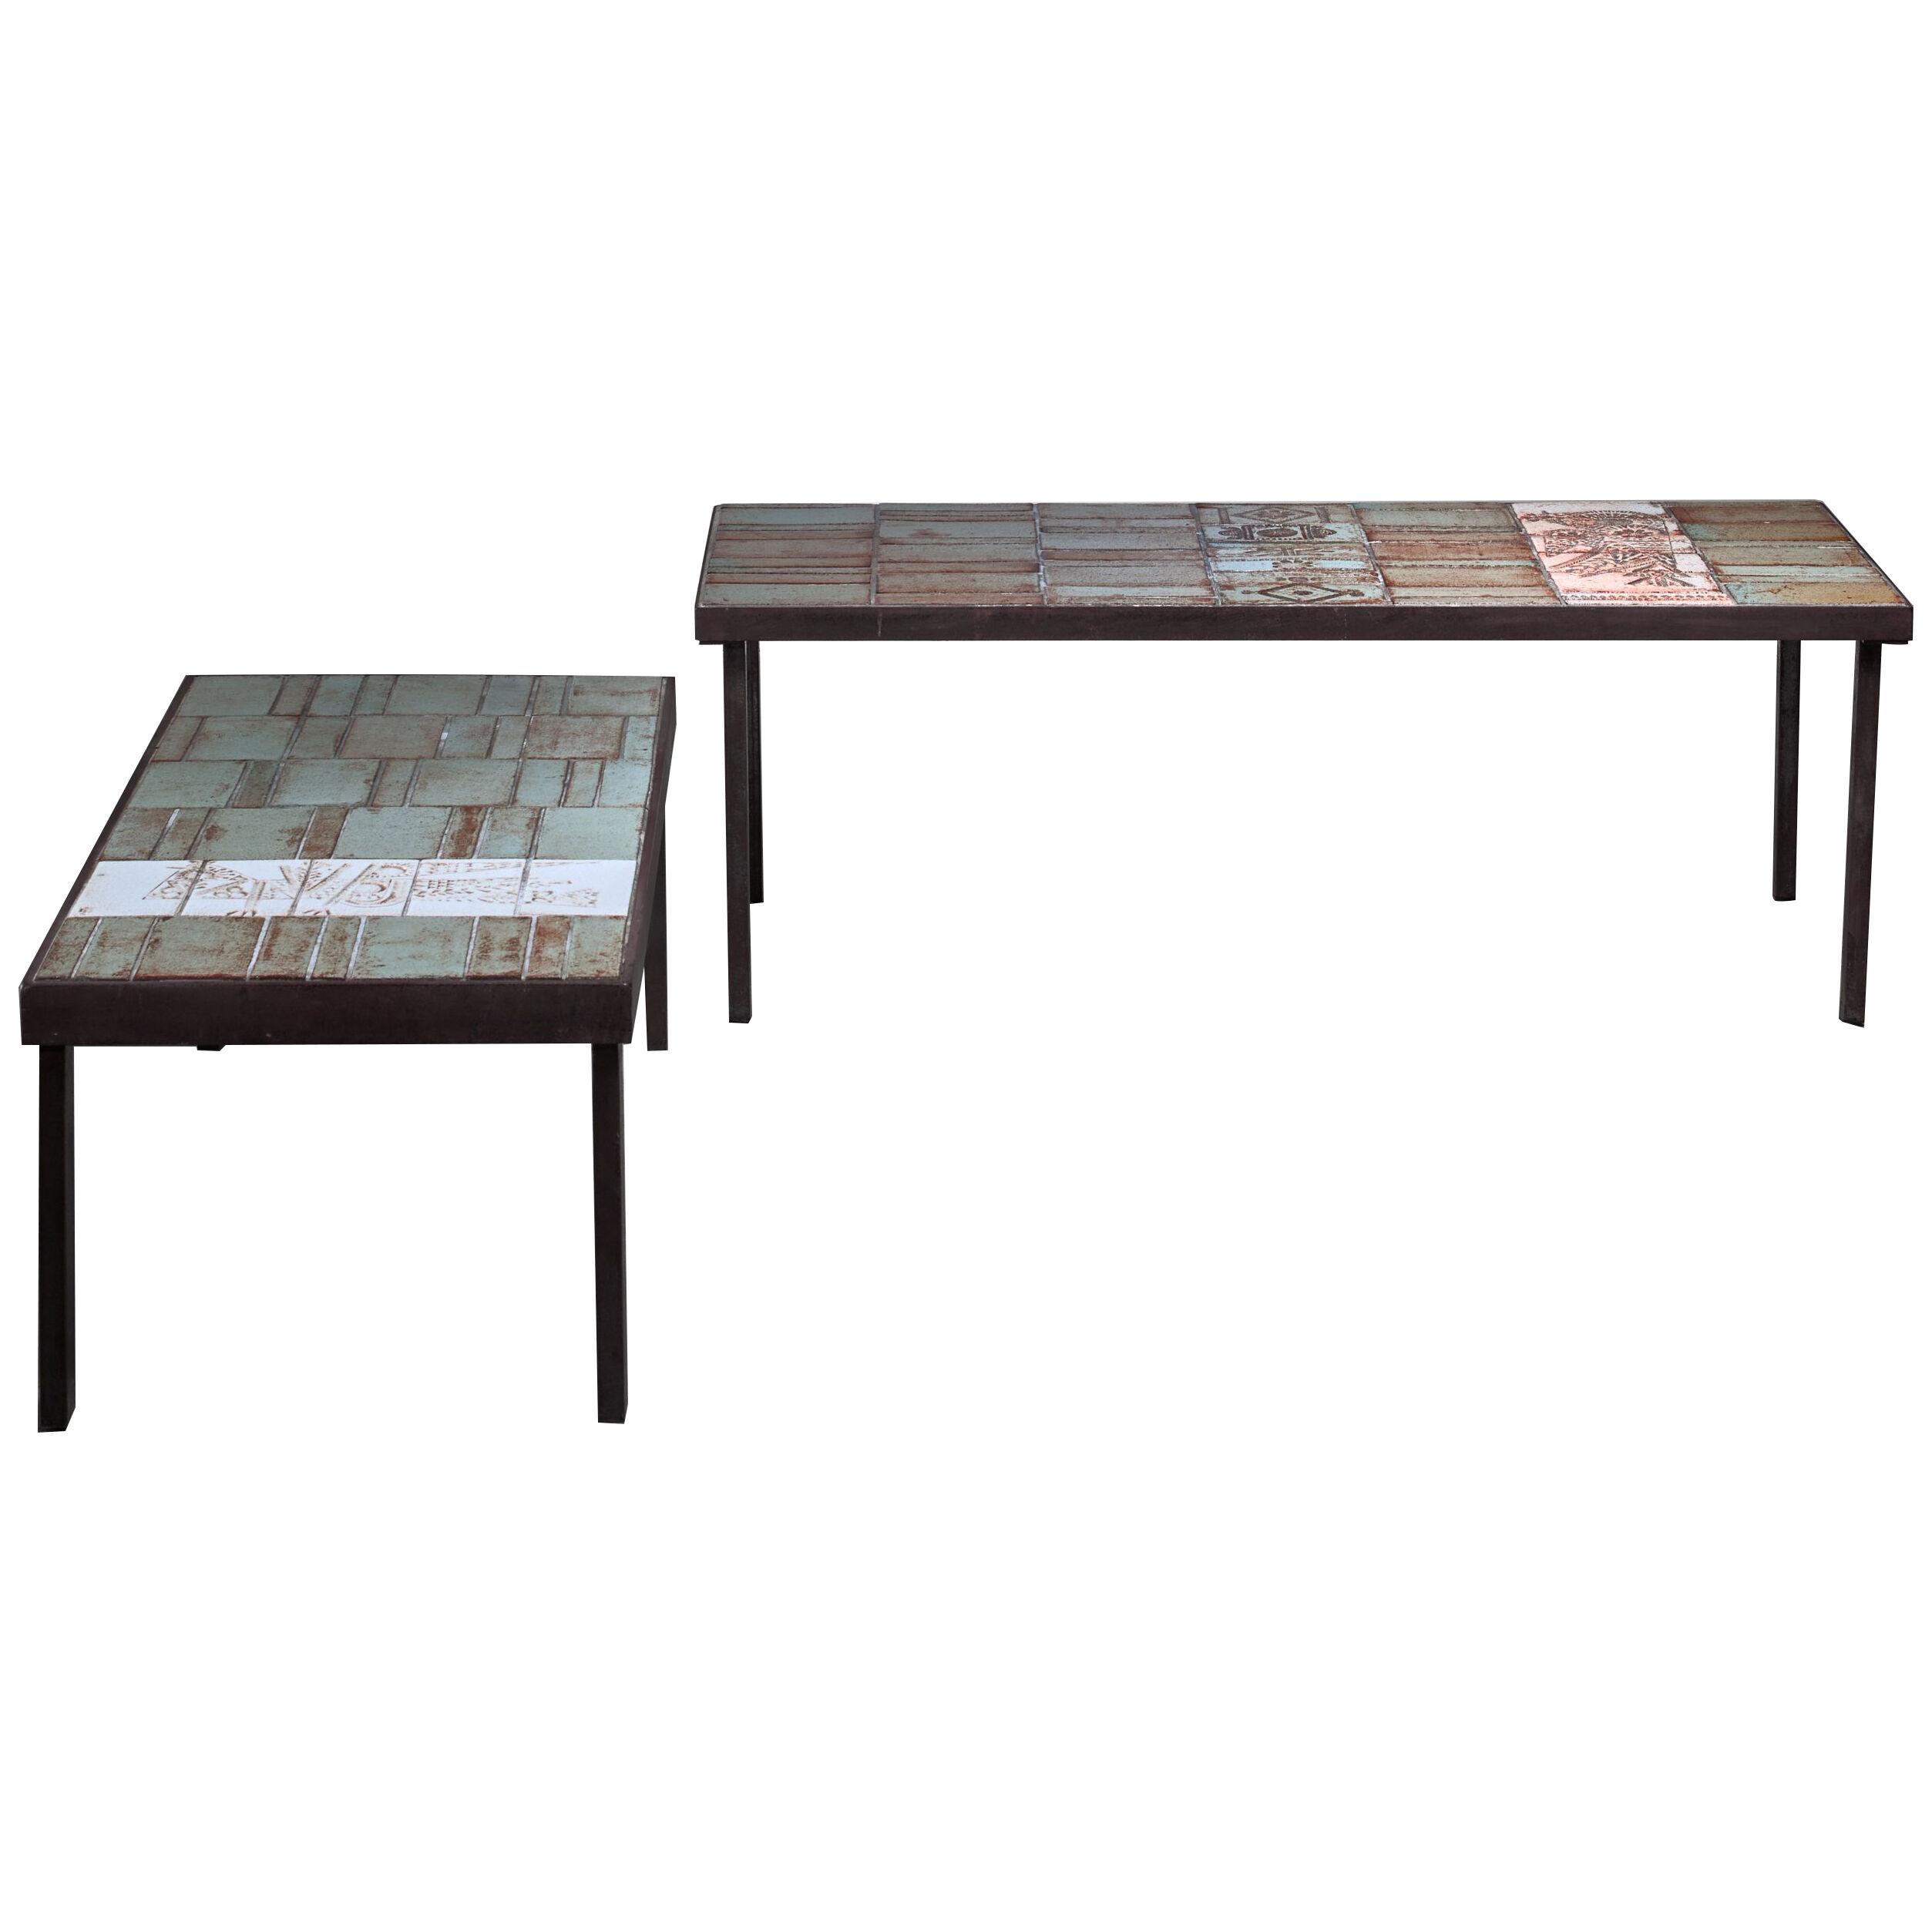 Pair of Roger Capron Signed Side Tables, France, 1950s